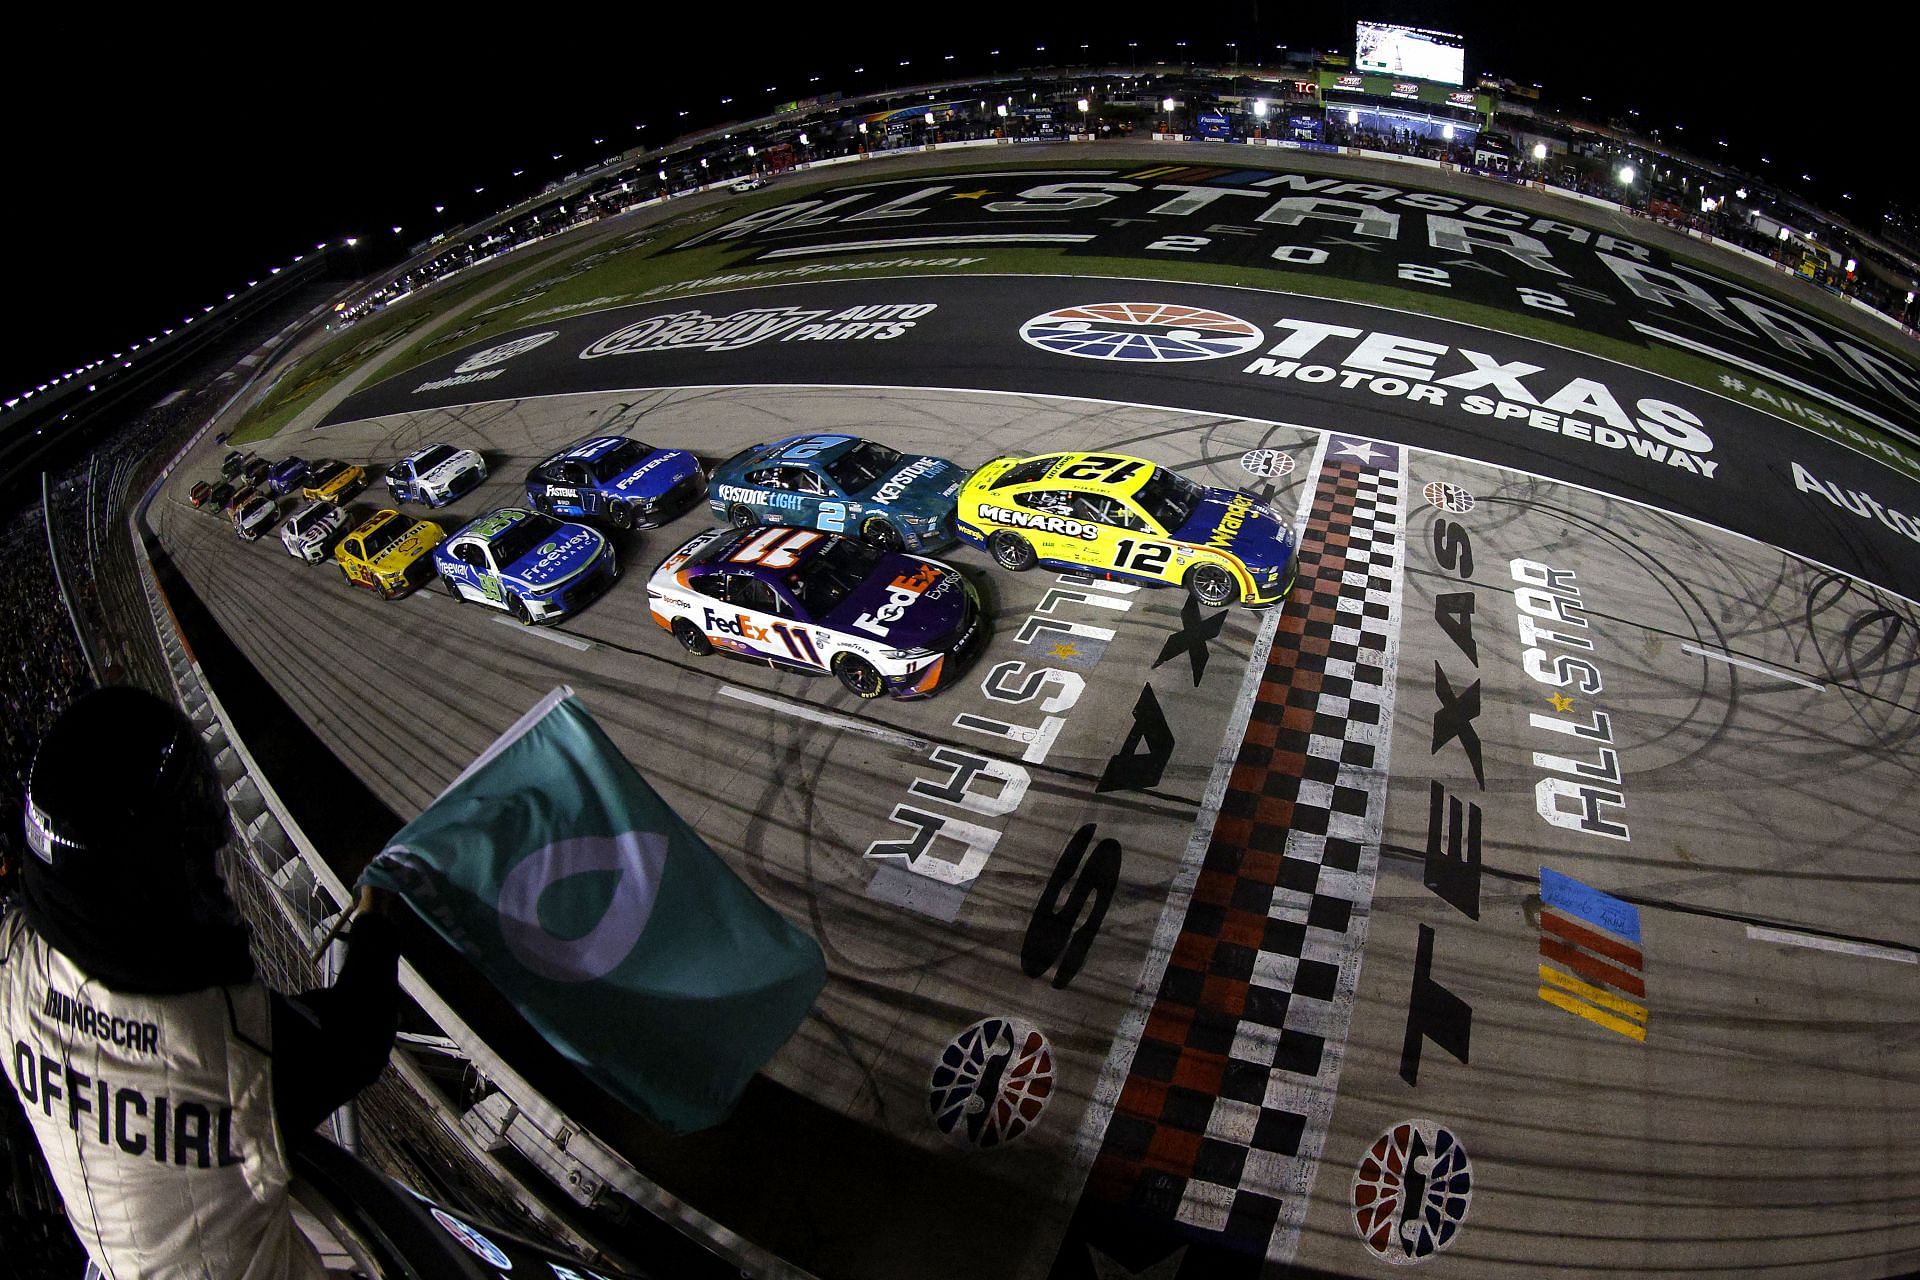 Ryan Blaney and Denny Hamlin lead the field to the overtime restart during the 2022 NASCAR Cup Series All-Star Race at Texas Motor Speedway in Fort Worth, Texas. (Photo by Sean Gardner/Getty Images)